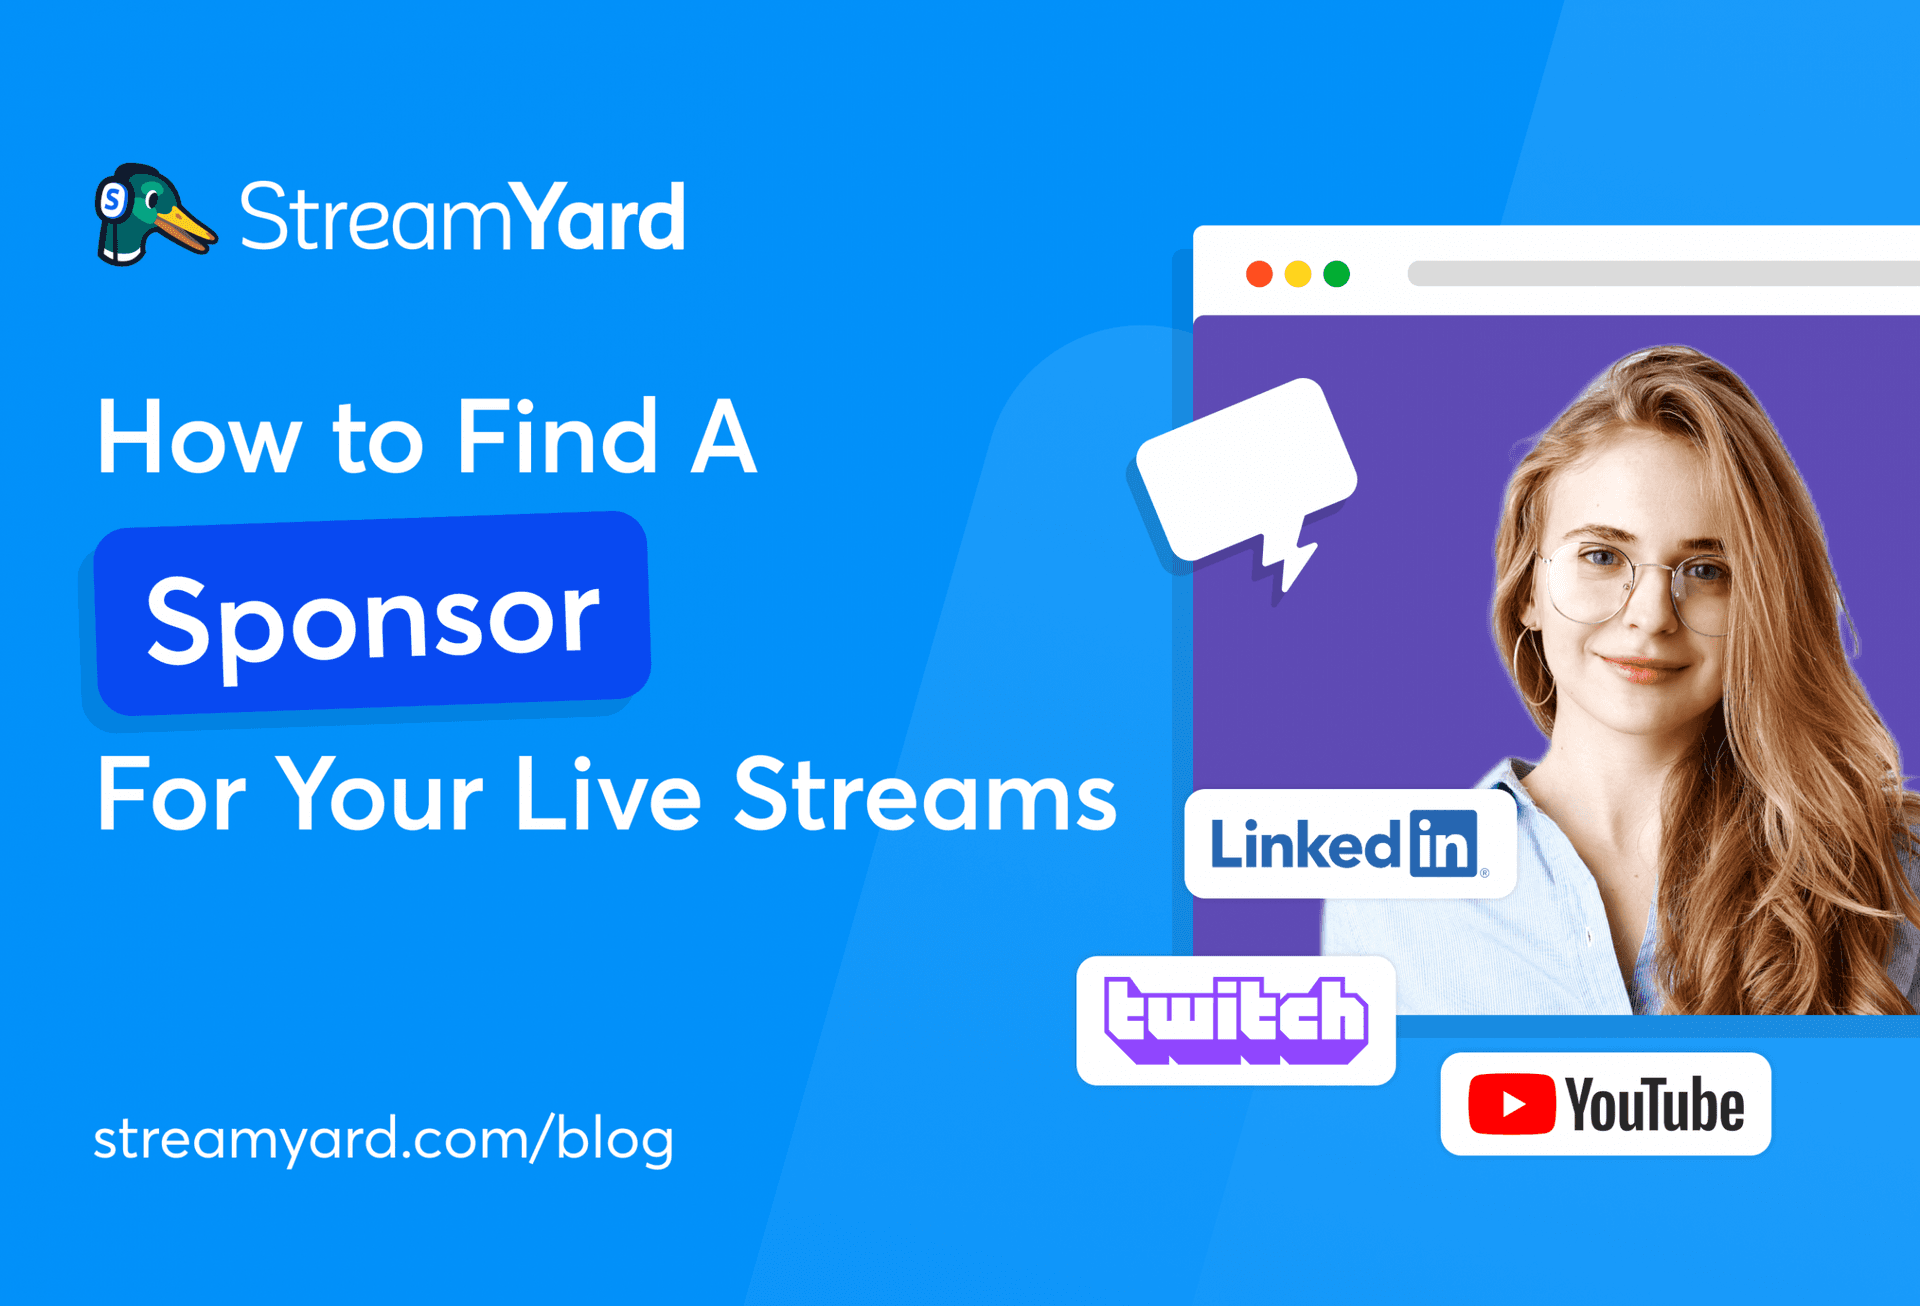 Check out this handy guide to learn how to find live stream sponsors and begin monetizing your live broadcasts to bring in extra income.